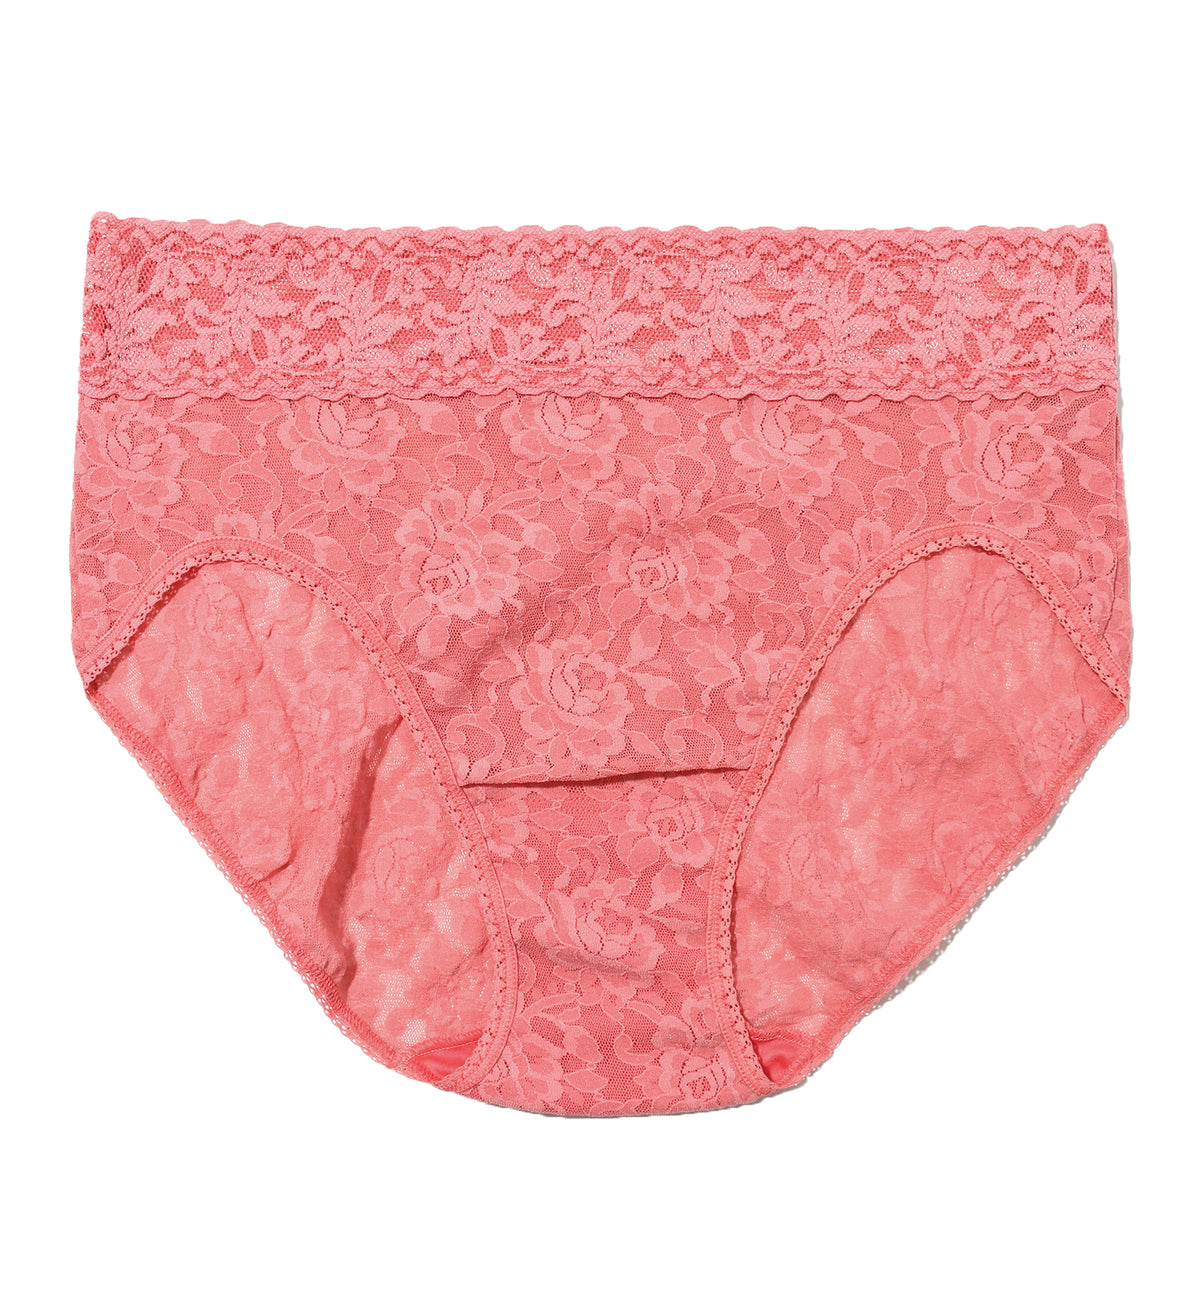 Hanky Panky Signature Lace French Brief (461),Small,Guava Pink - Guava Pink,Small